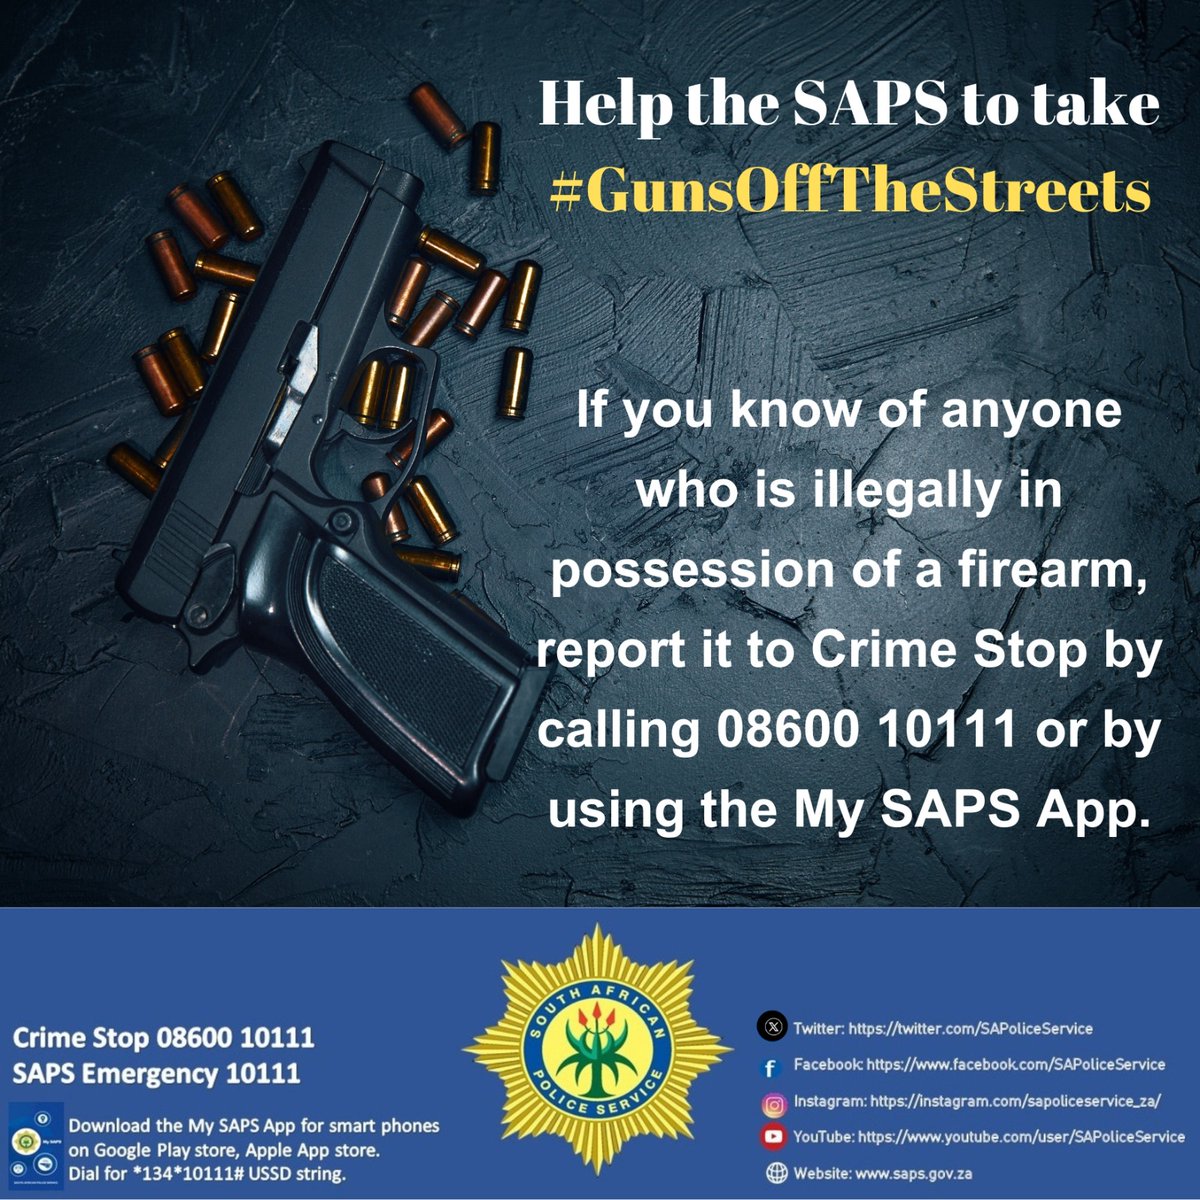 #sapsWC Efforts to get rid our communities of illegal firearms and ammo yielded positive results when several suspects were arrested in separate incidents on charges related to the possession of prohibited firearms and possession of  a hijacked vehicle. #GunsOffTheStreets